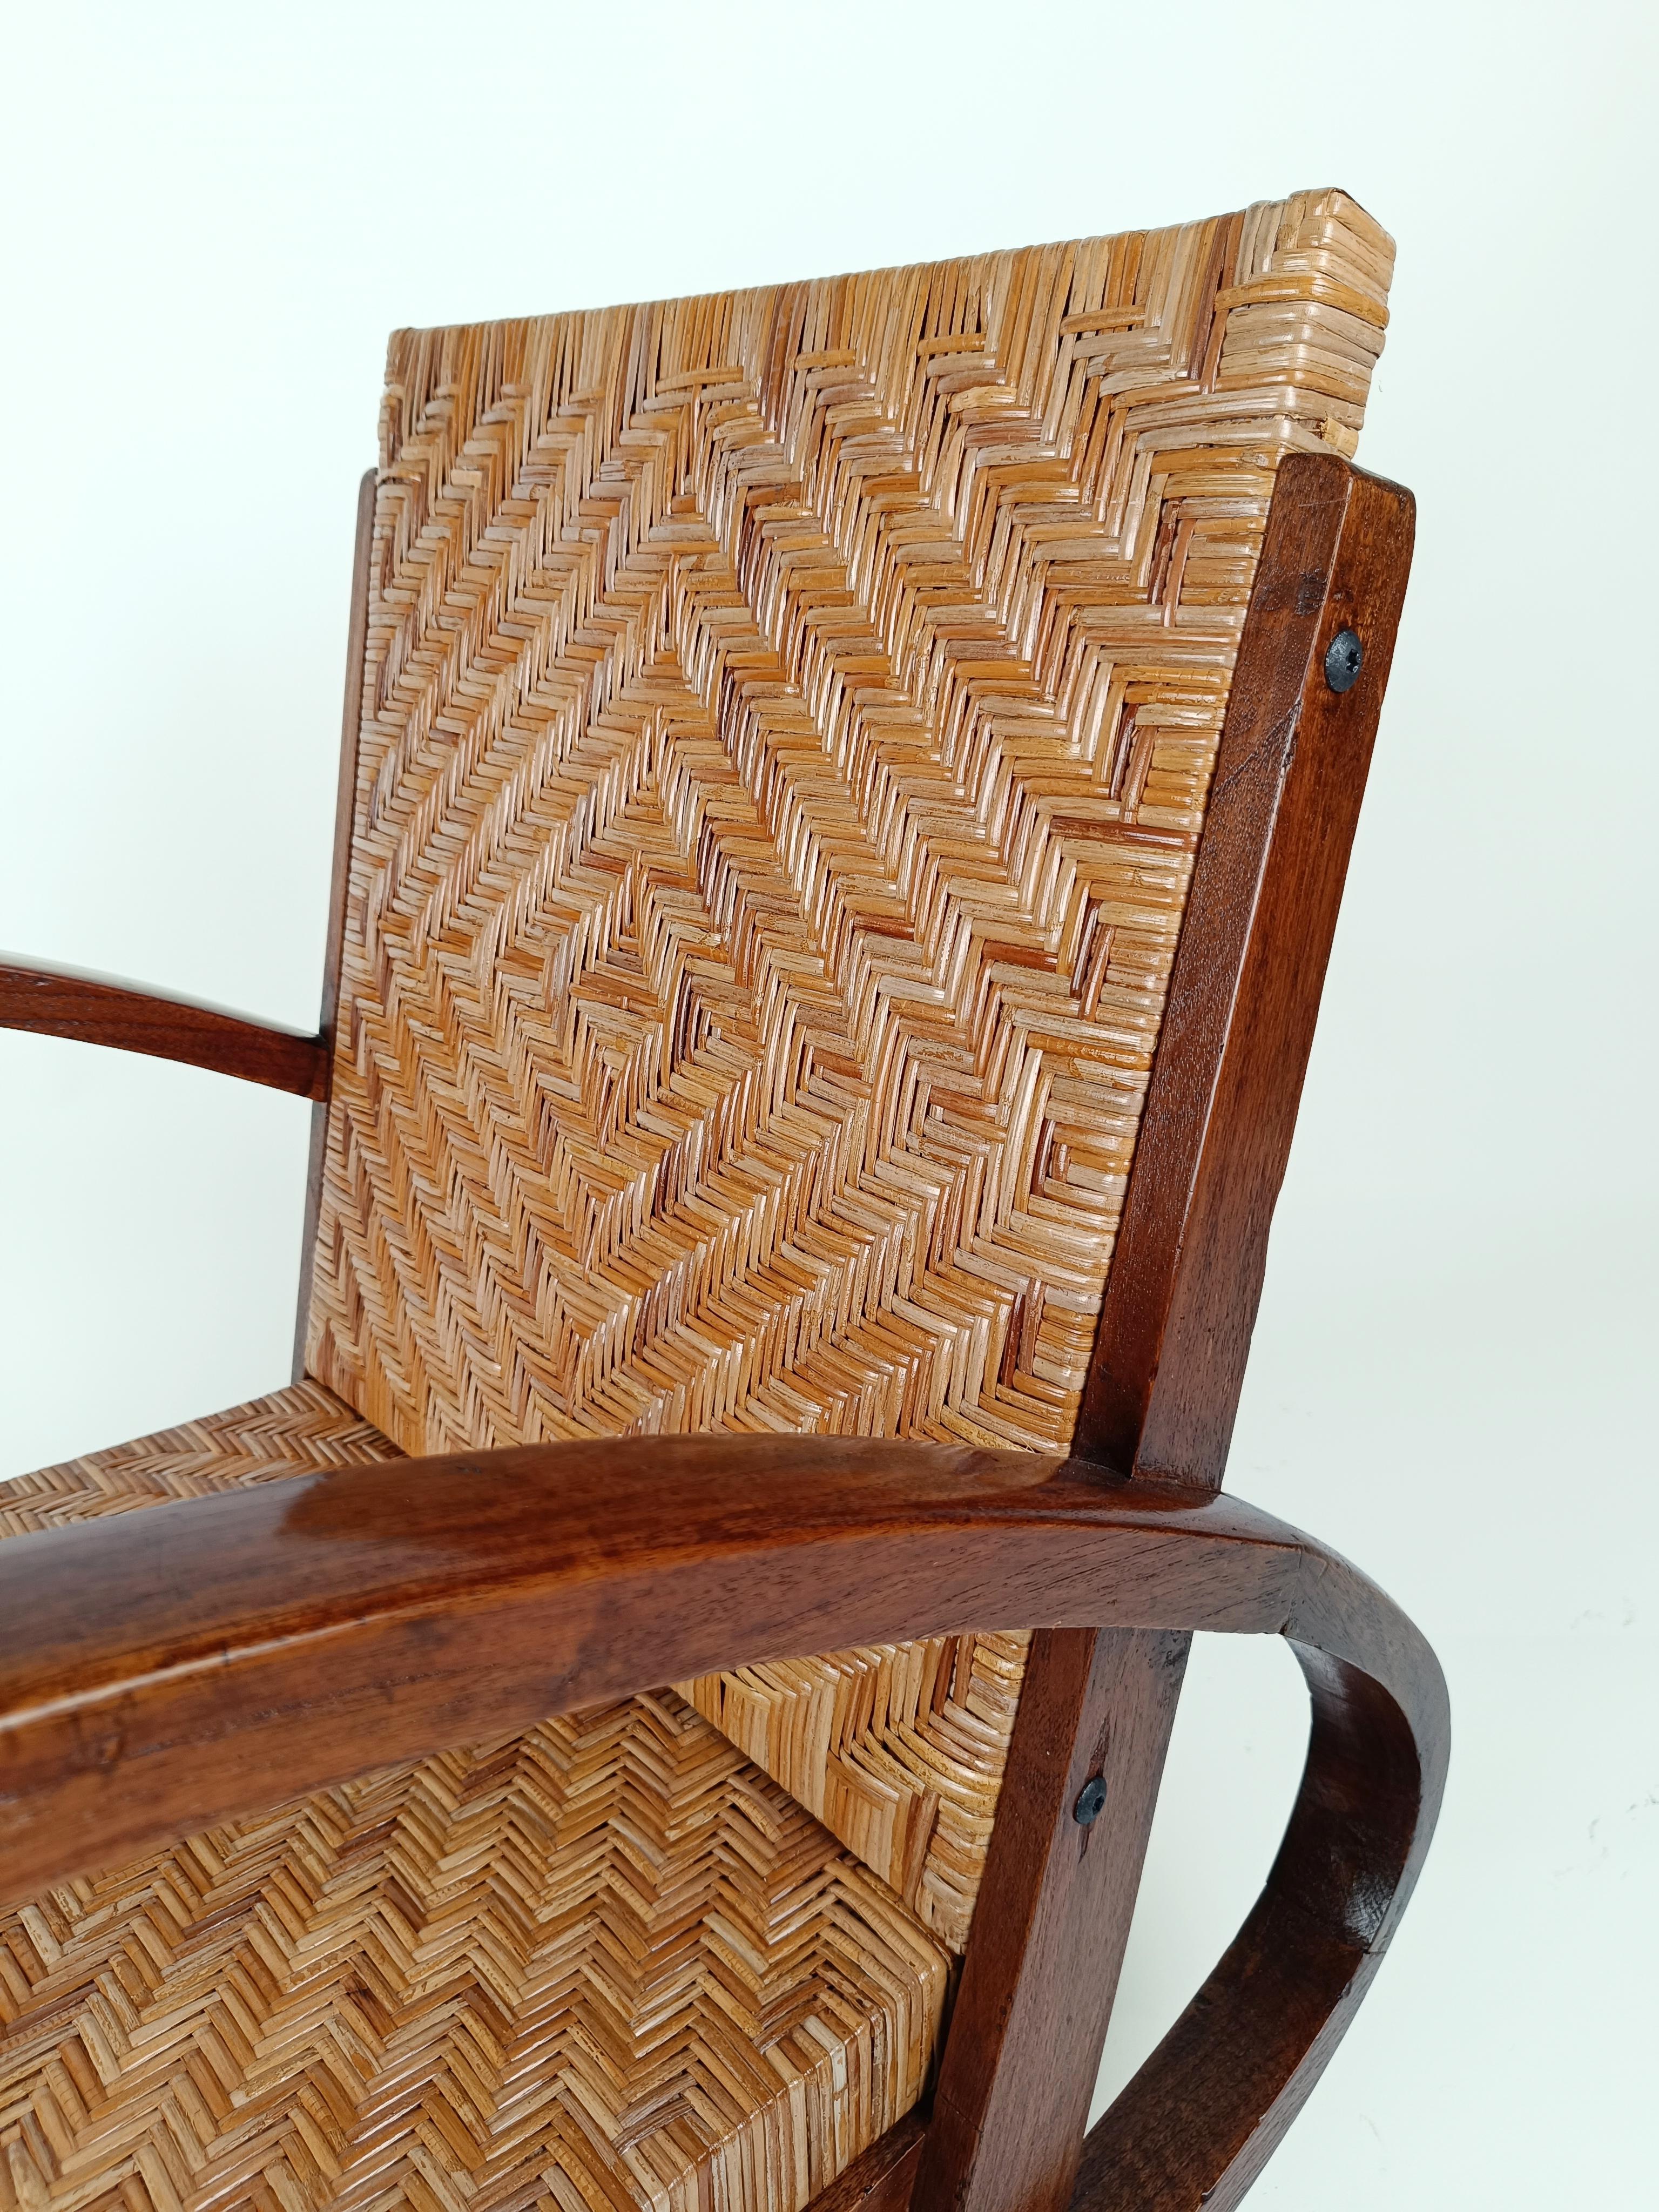 A Pair of Original Art Deco Armchairs, probably made in Italy by amazing craftsmen, between the 1920s and 1930s.
This set is made up of 2 Mid Century Armchairs in solid hardwood with cane seats.
The elegance of the art deco style is visible in the